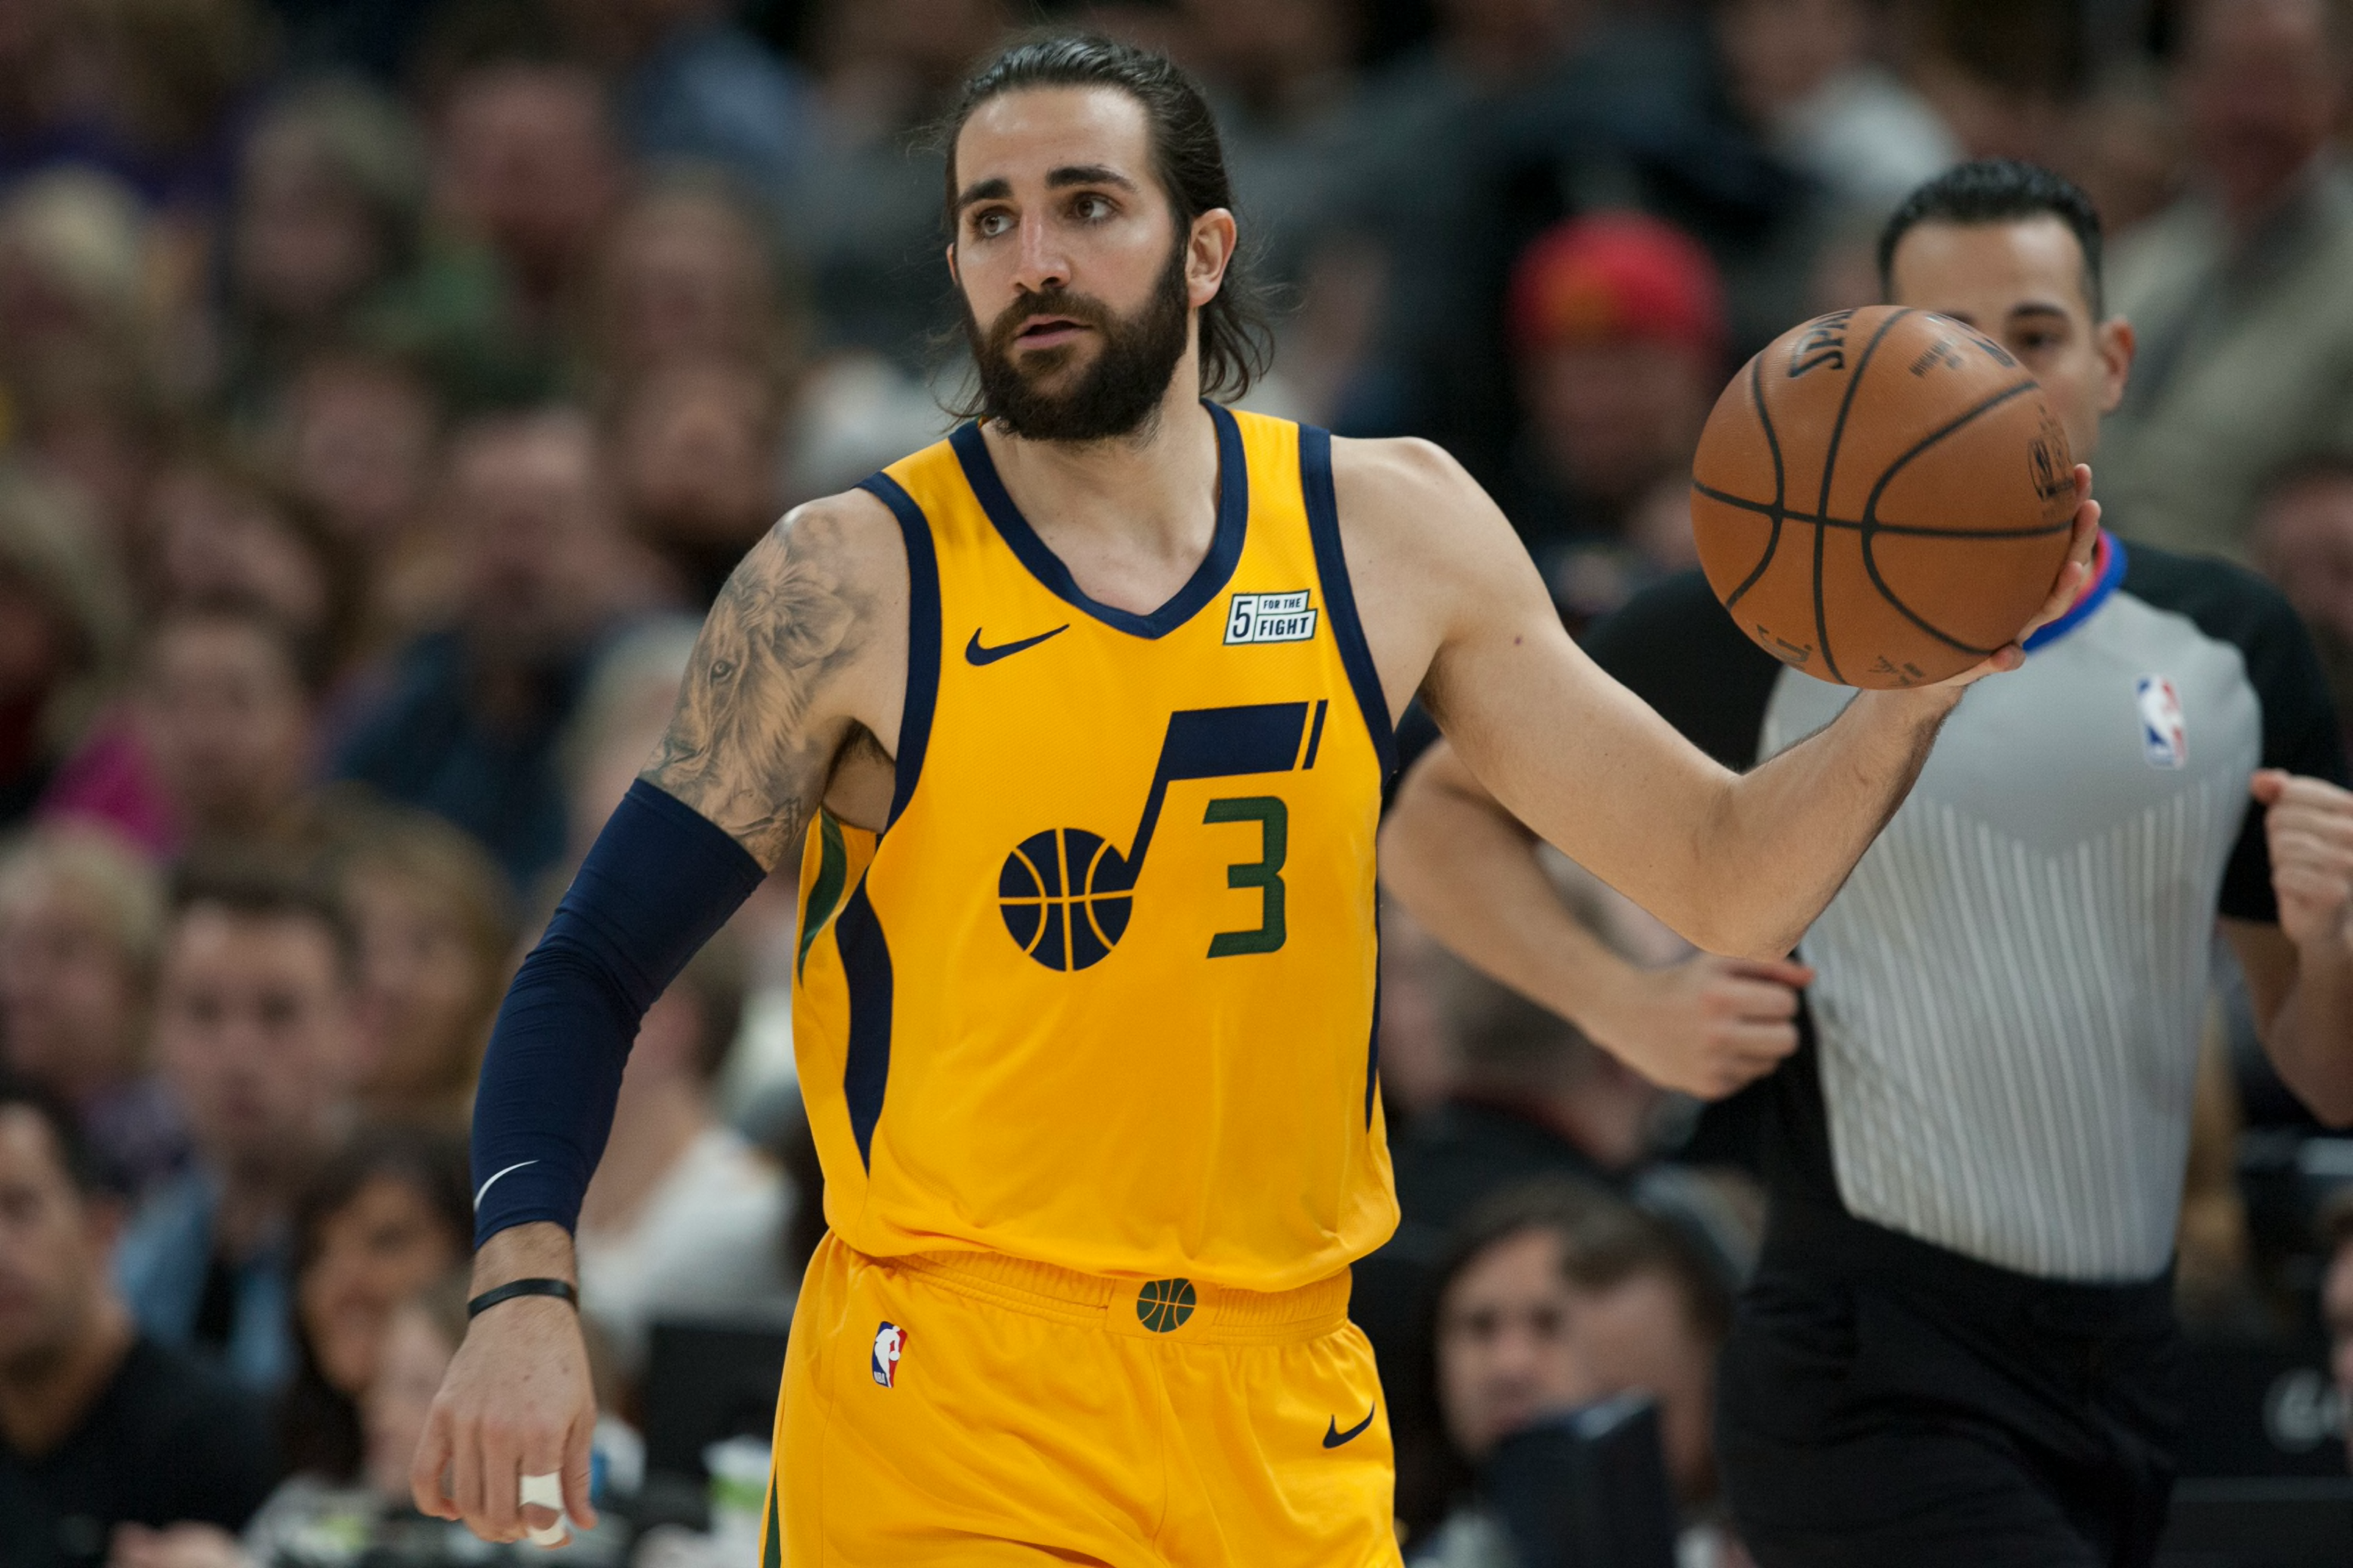 How fans can assist Ricky Rubio to win NBA service award - Deseret News